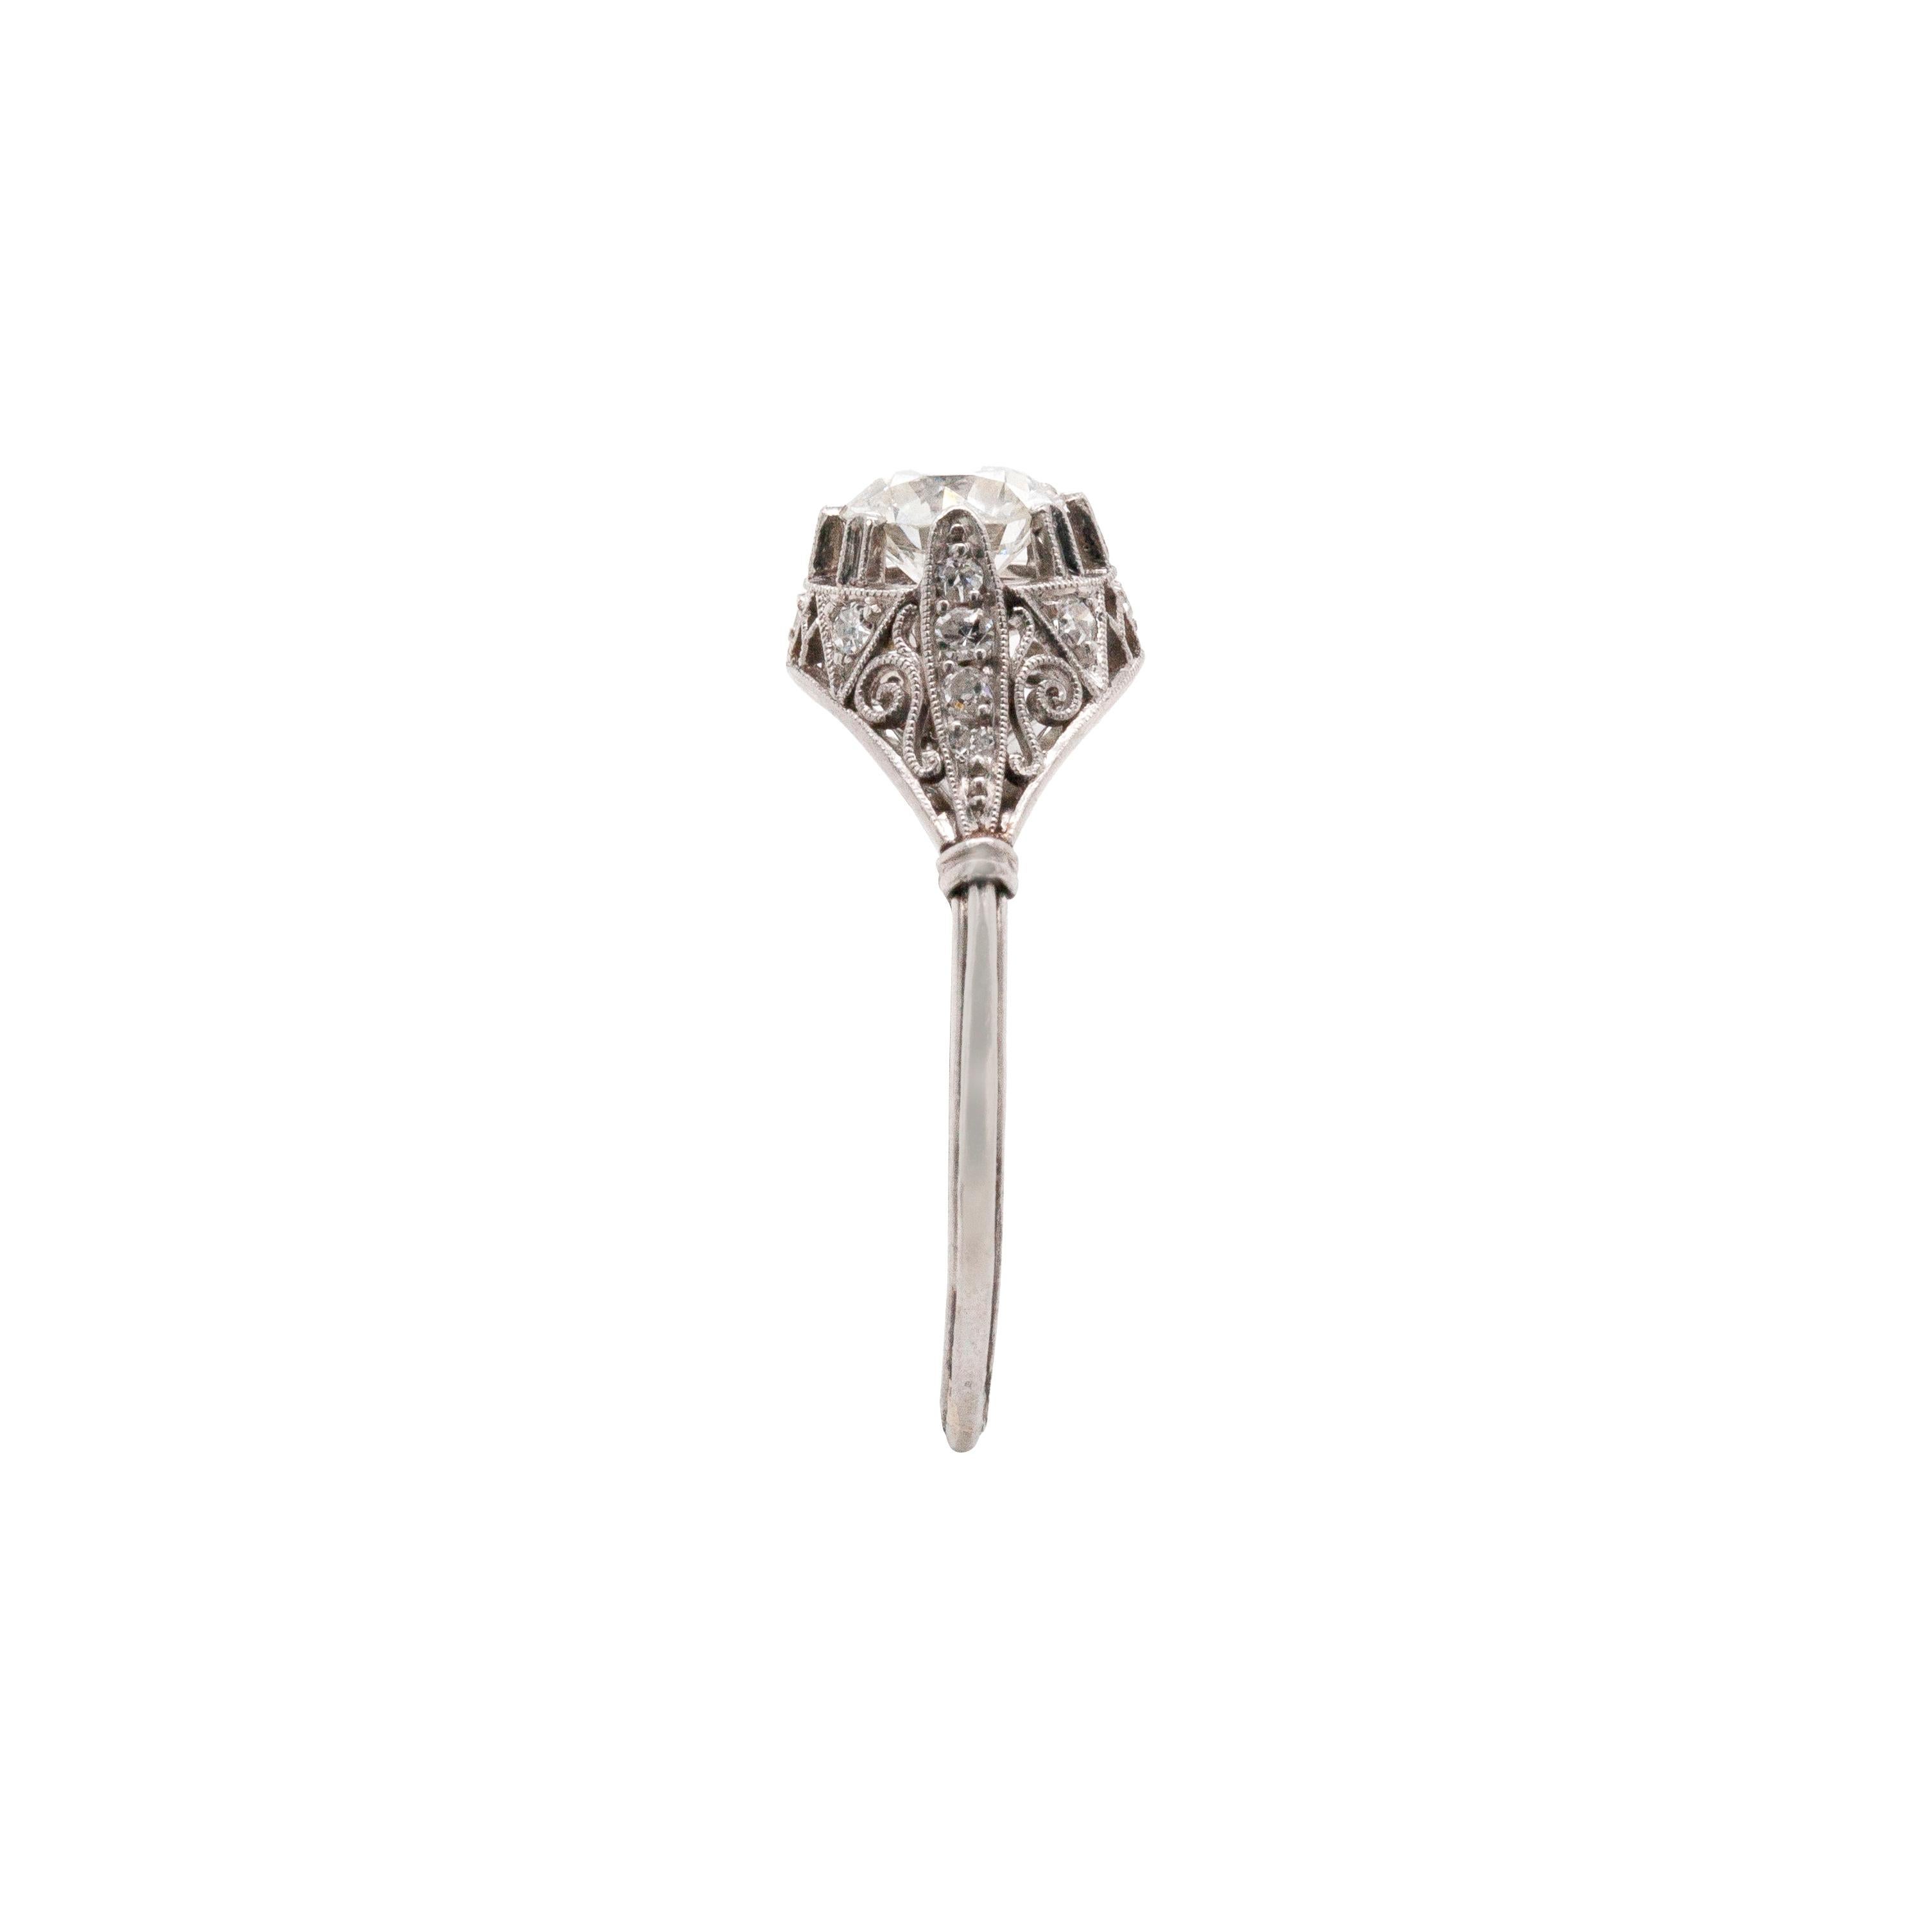 Women's Art Deco Platinum and Diamond Ring With Exquisite Filigree Detailing For Sale